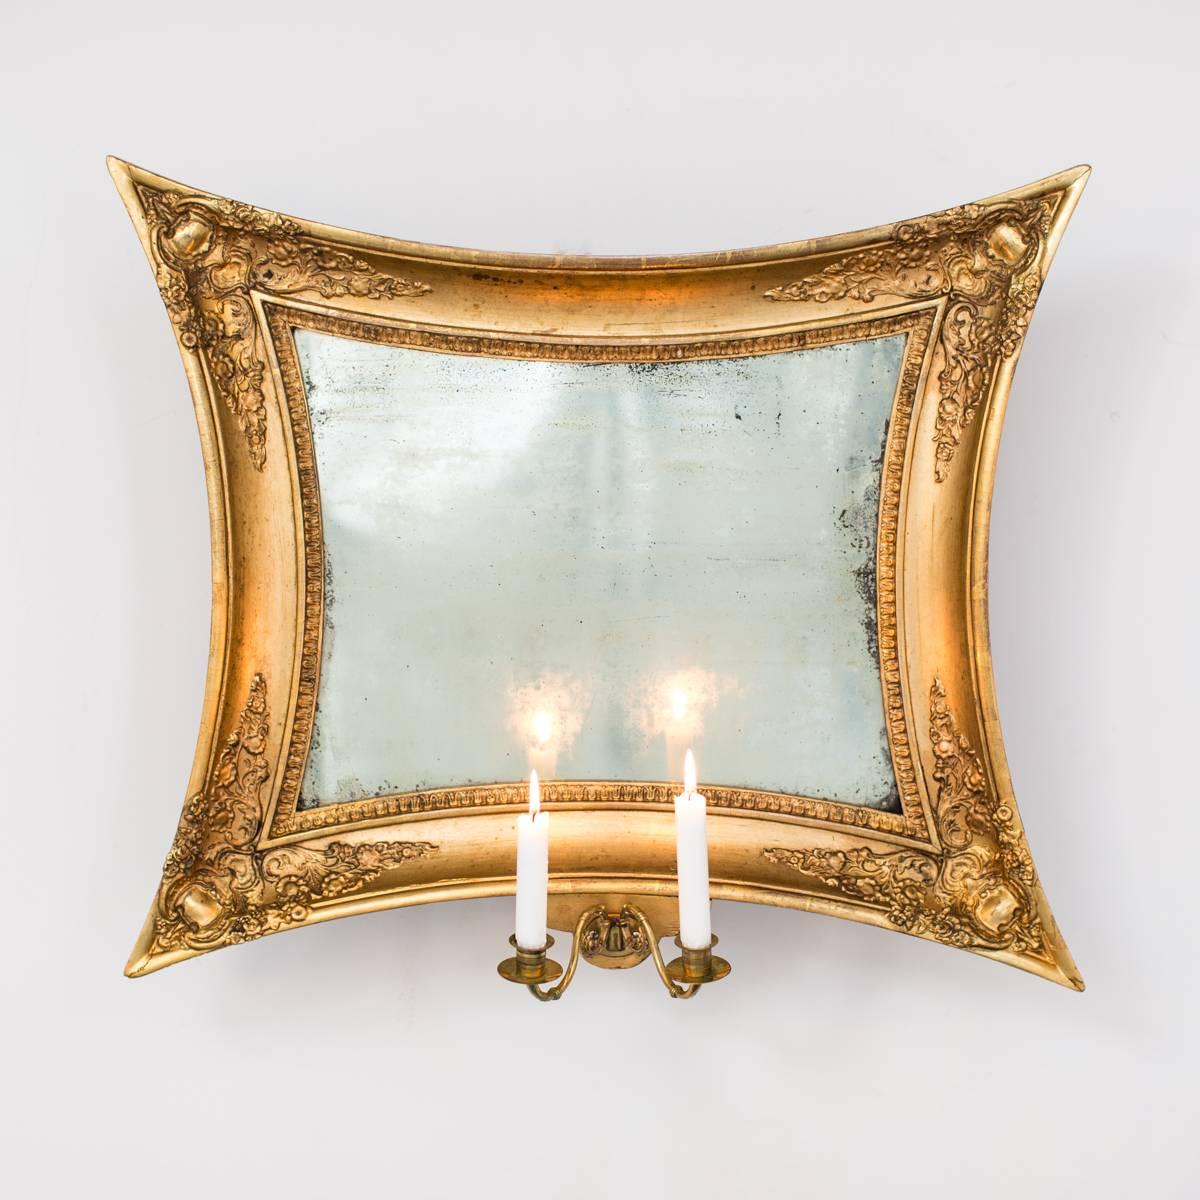 Mirrored wall sconce in a gilded frame with two arms for candles. Made during the later part of the Empire period, circa 1830.